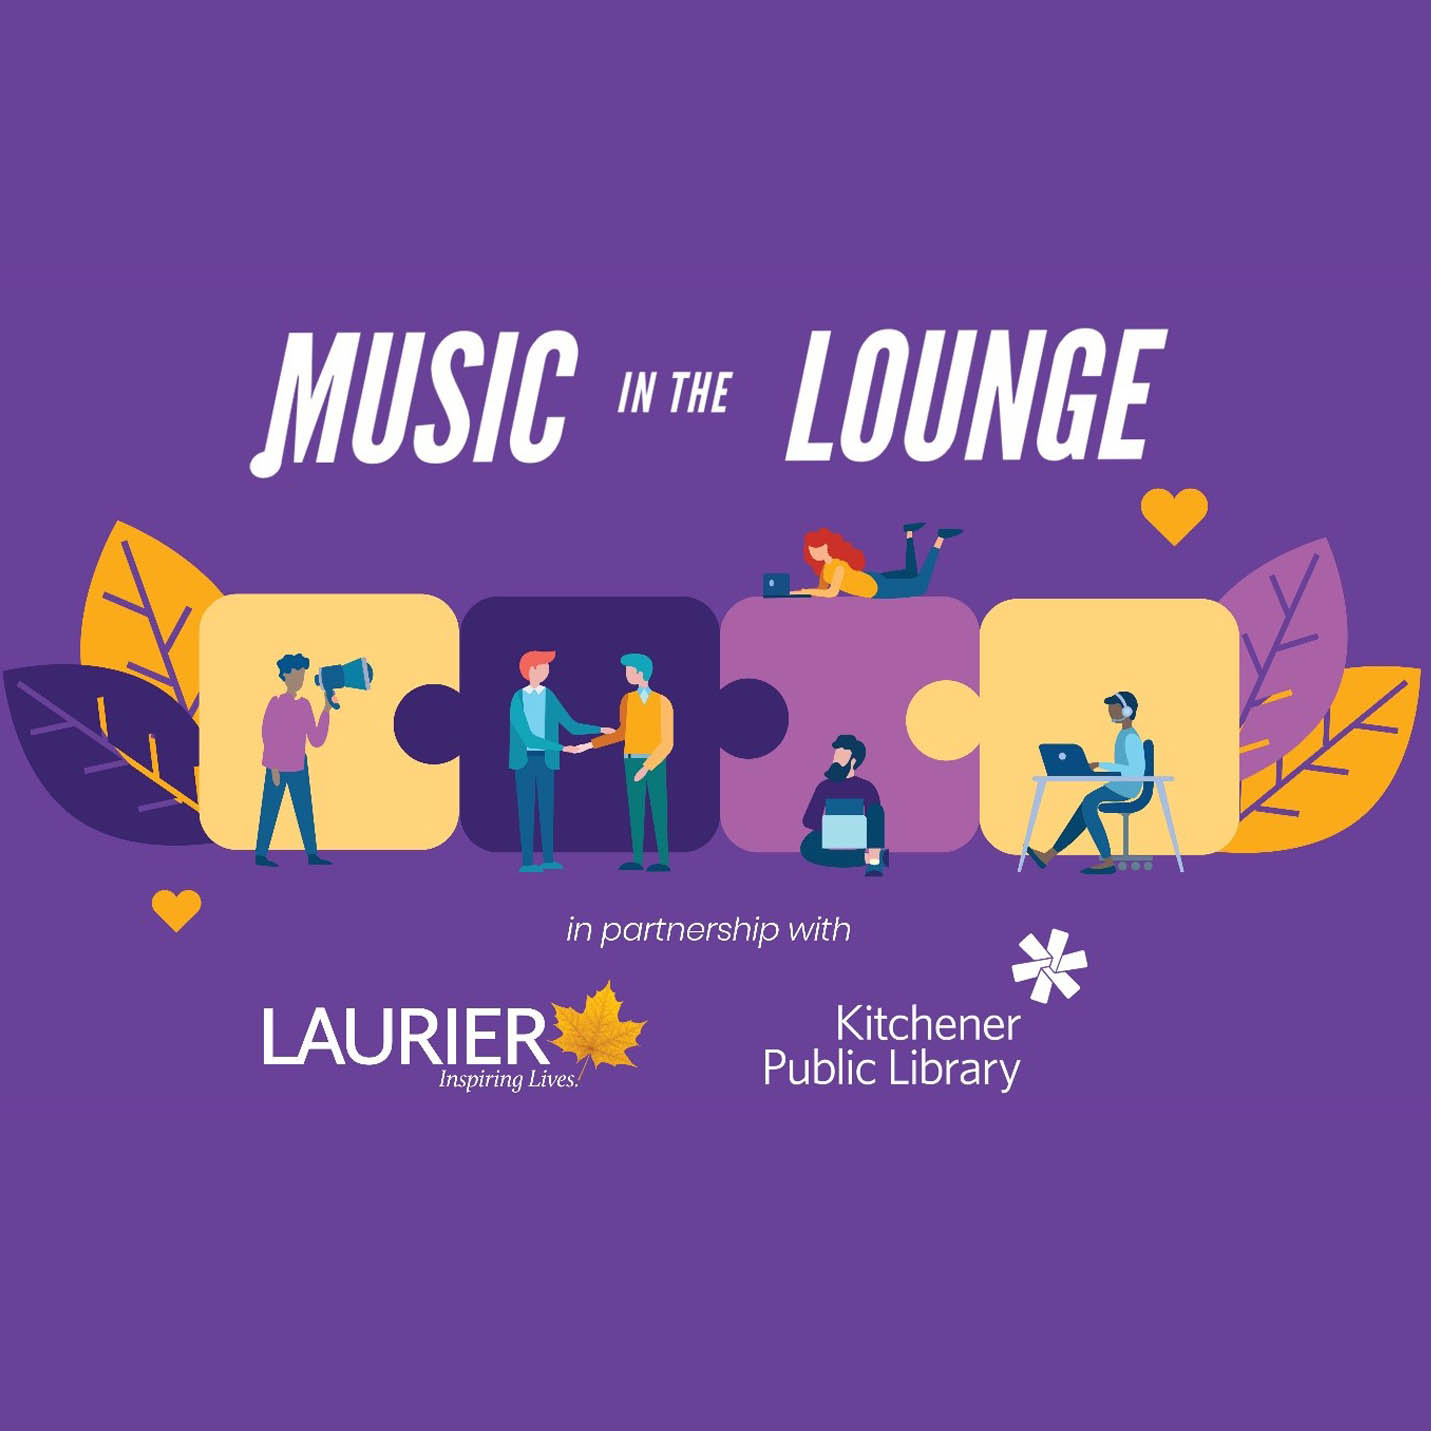 Laurier partners with Kitchener Public Library to offer a series of virtual concerts